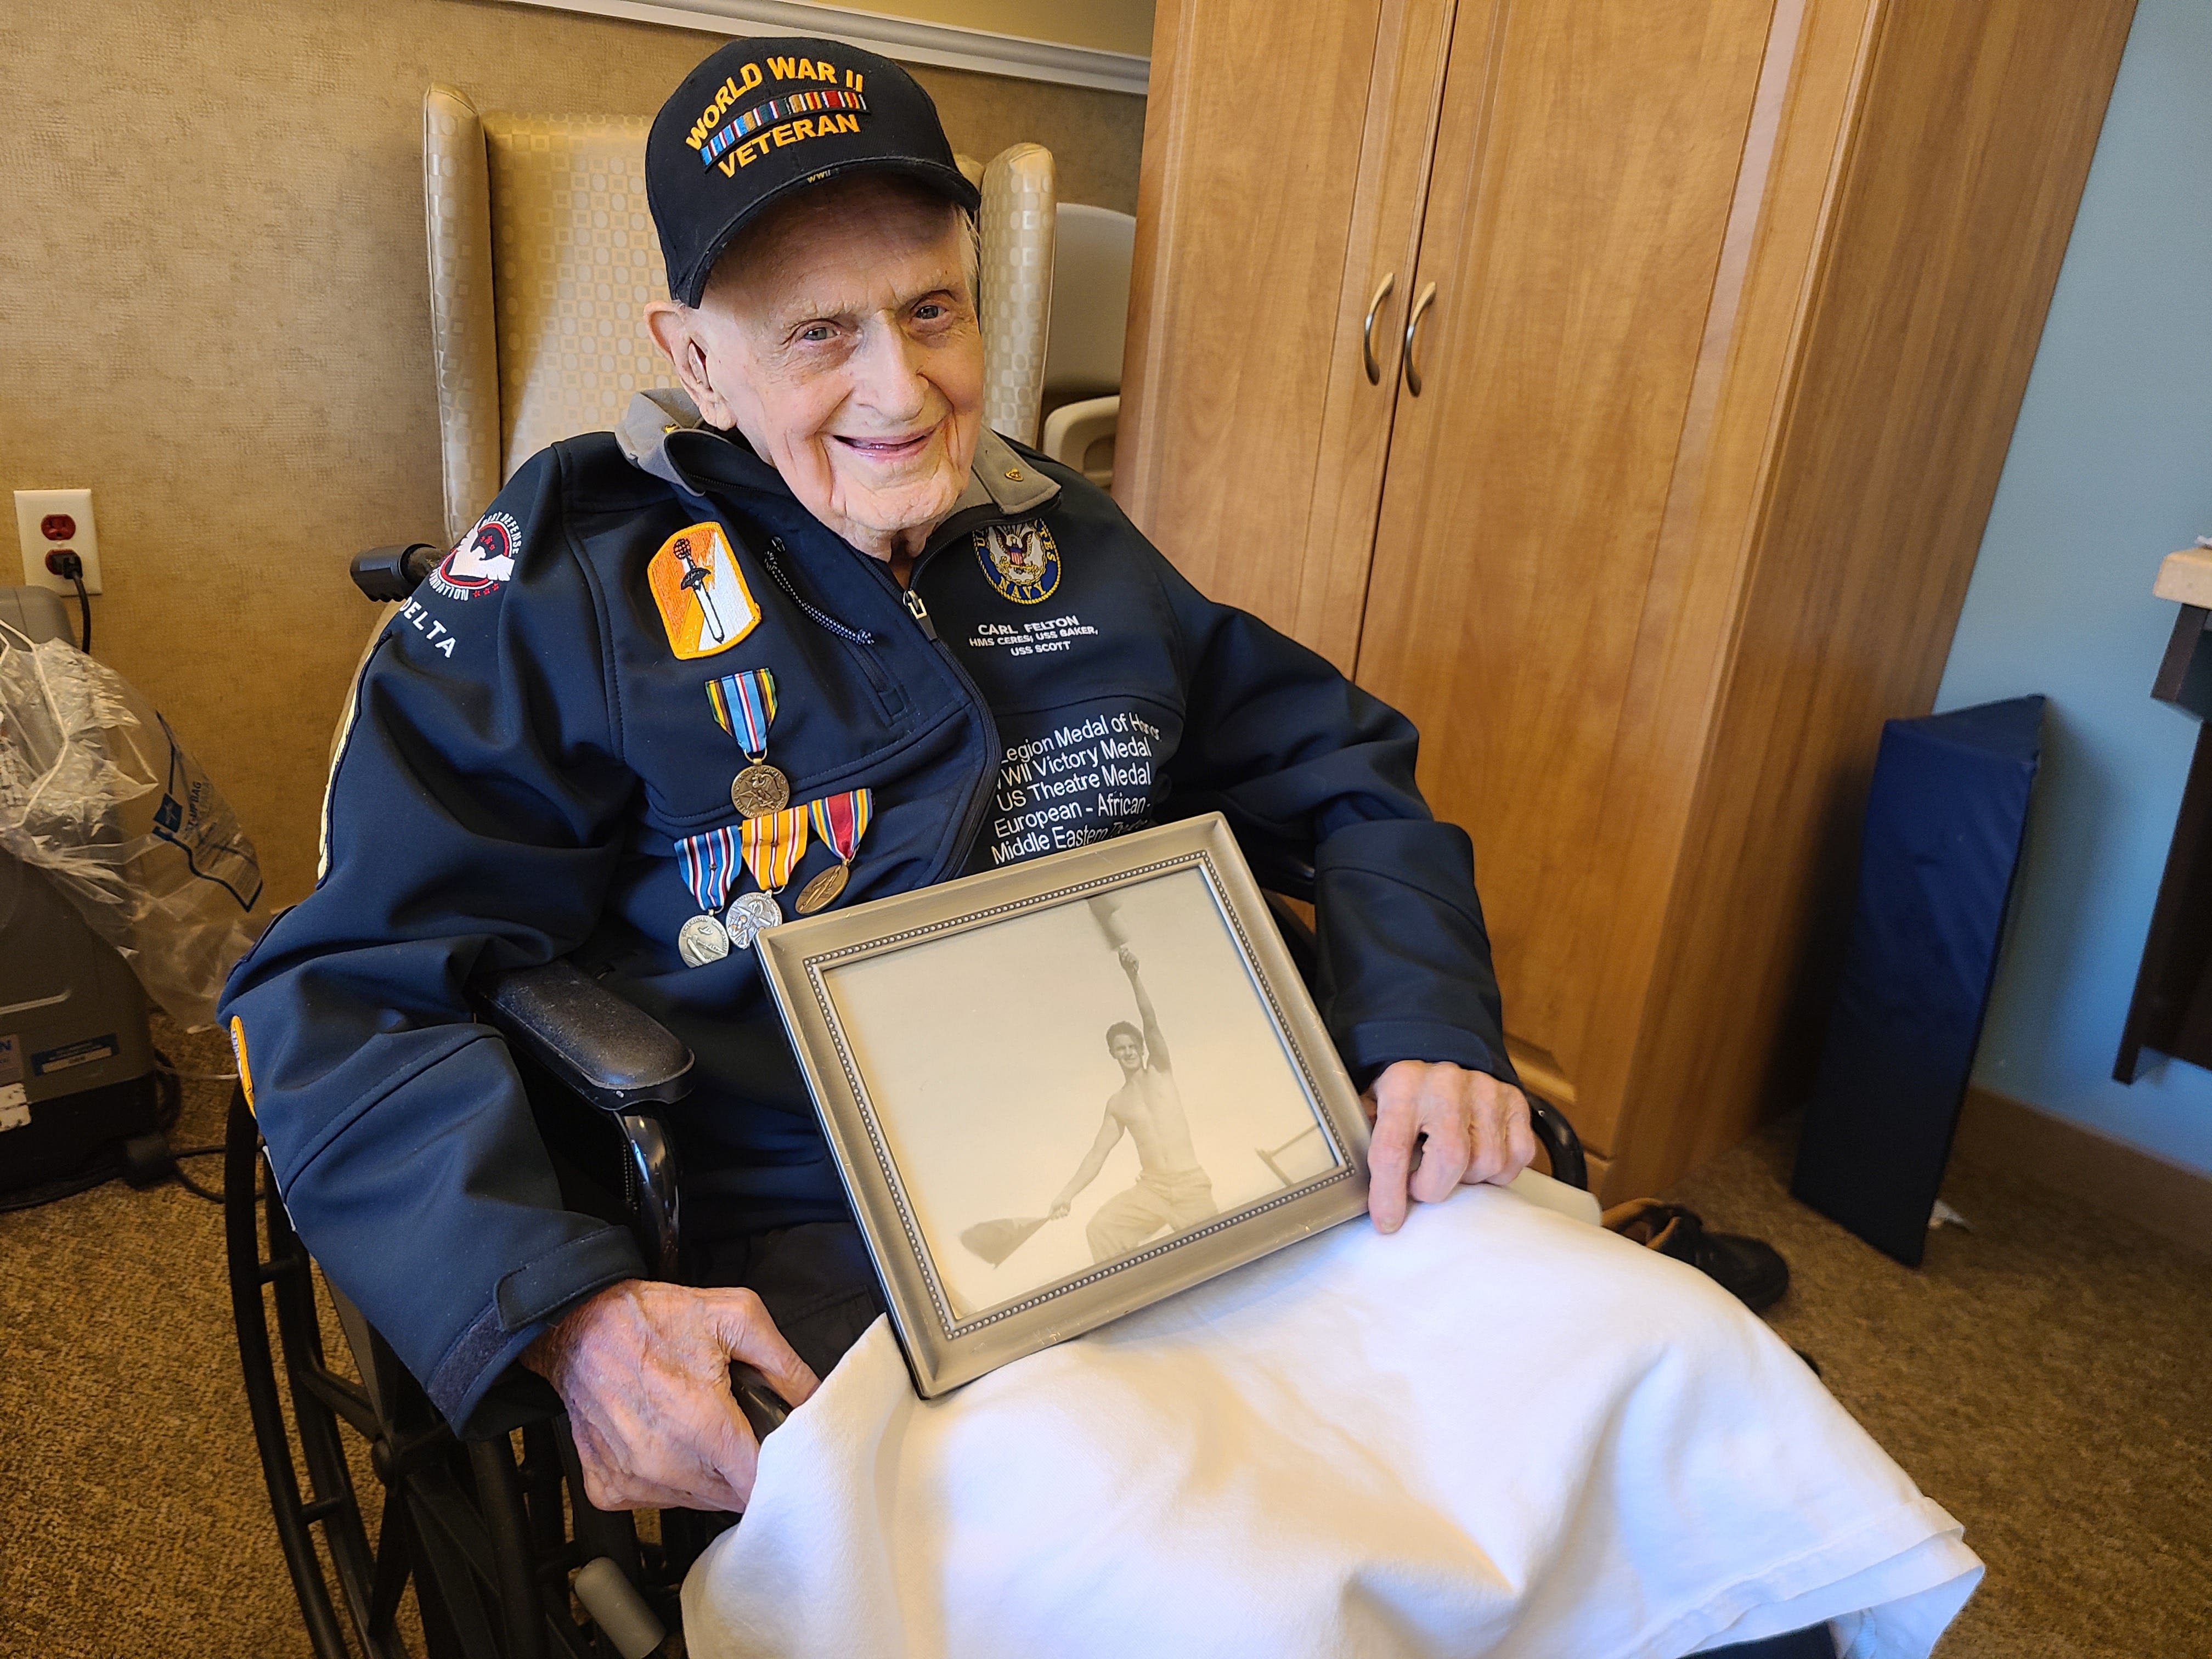 D-Day at Omaha Beach taught Carl Felton, now 98, that life and democracy are fragile